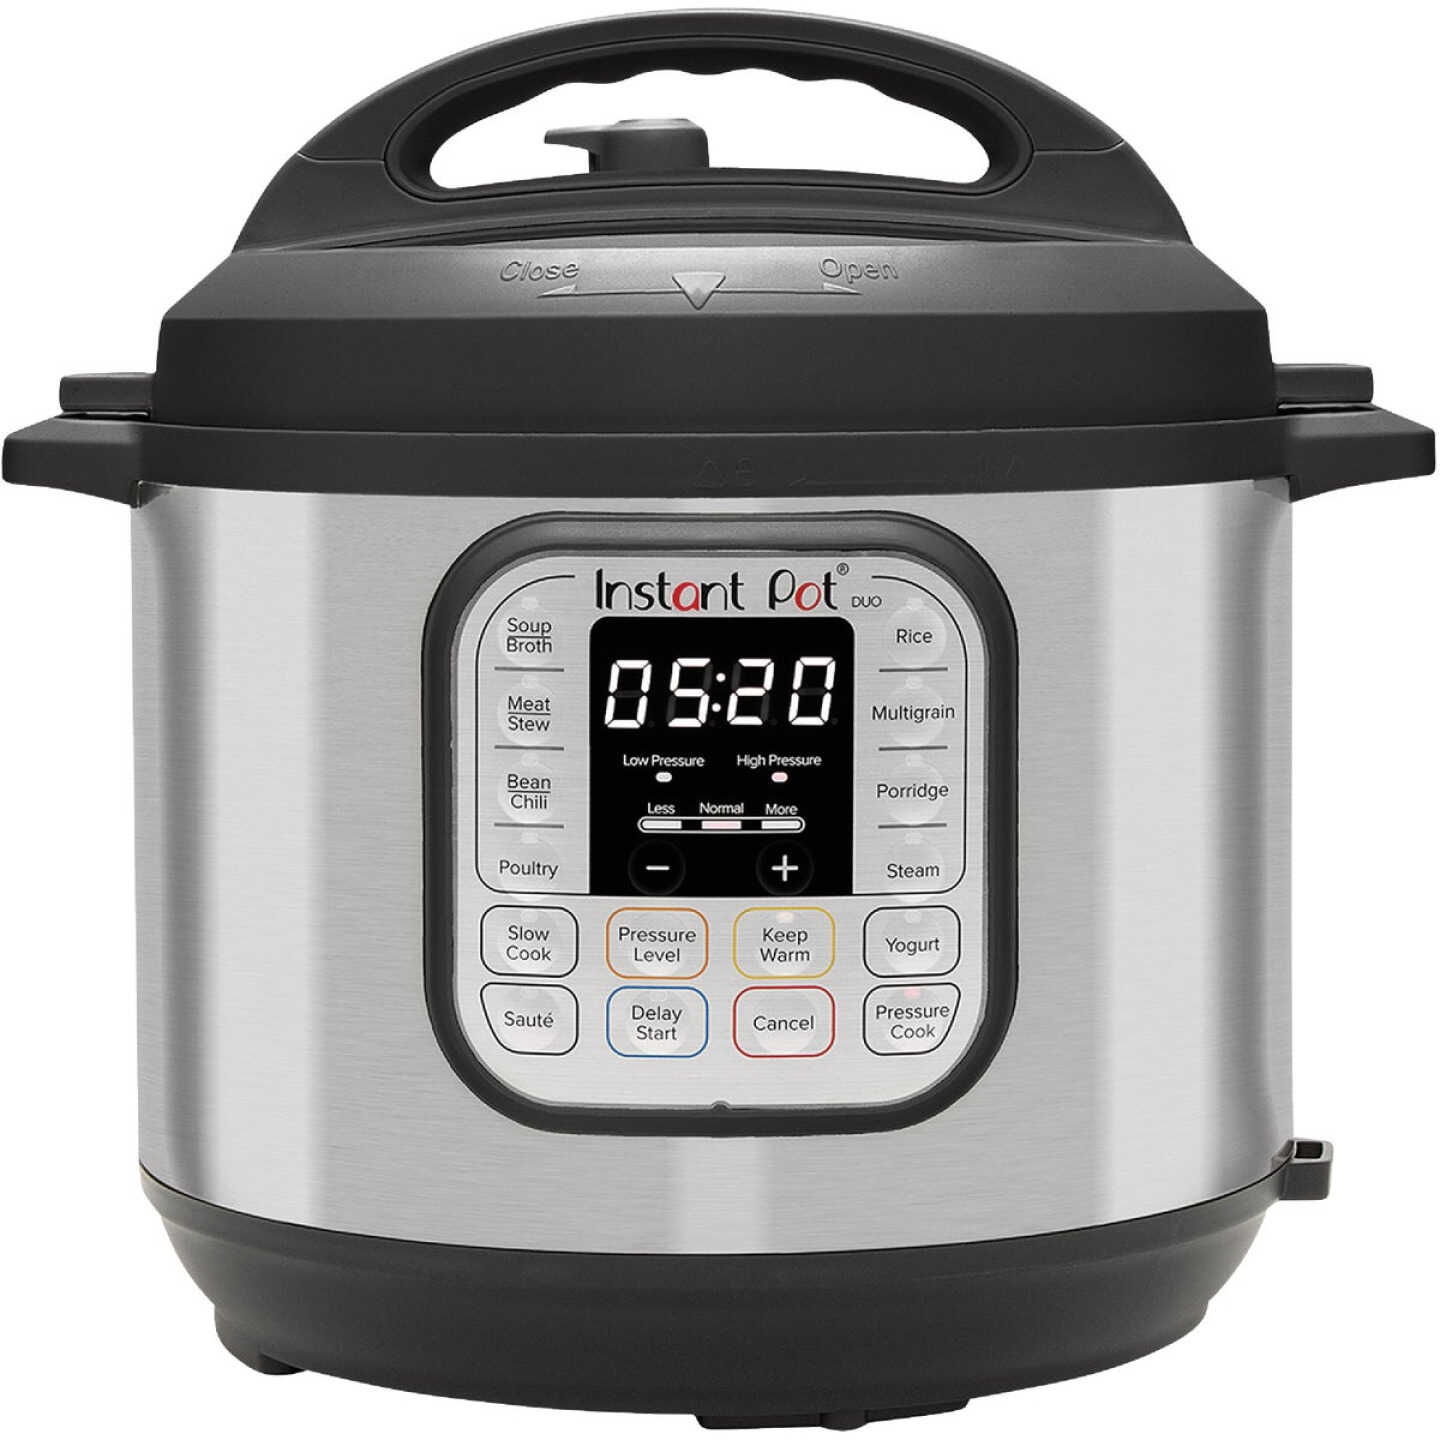  KOOC Small Slow Cooker, 2-Quart, Free Liners Included